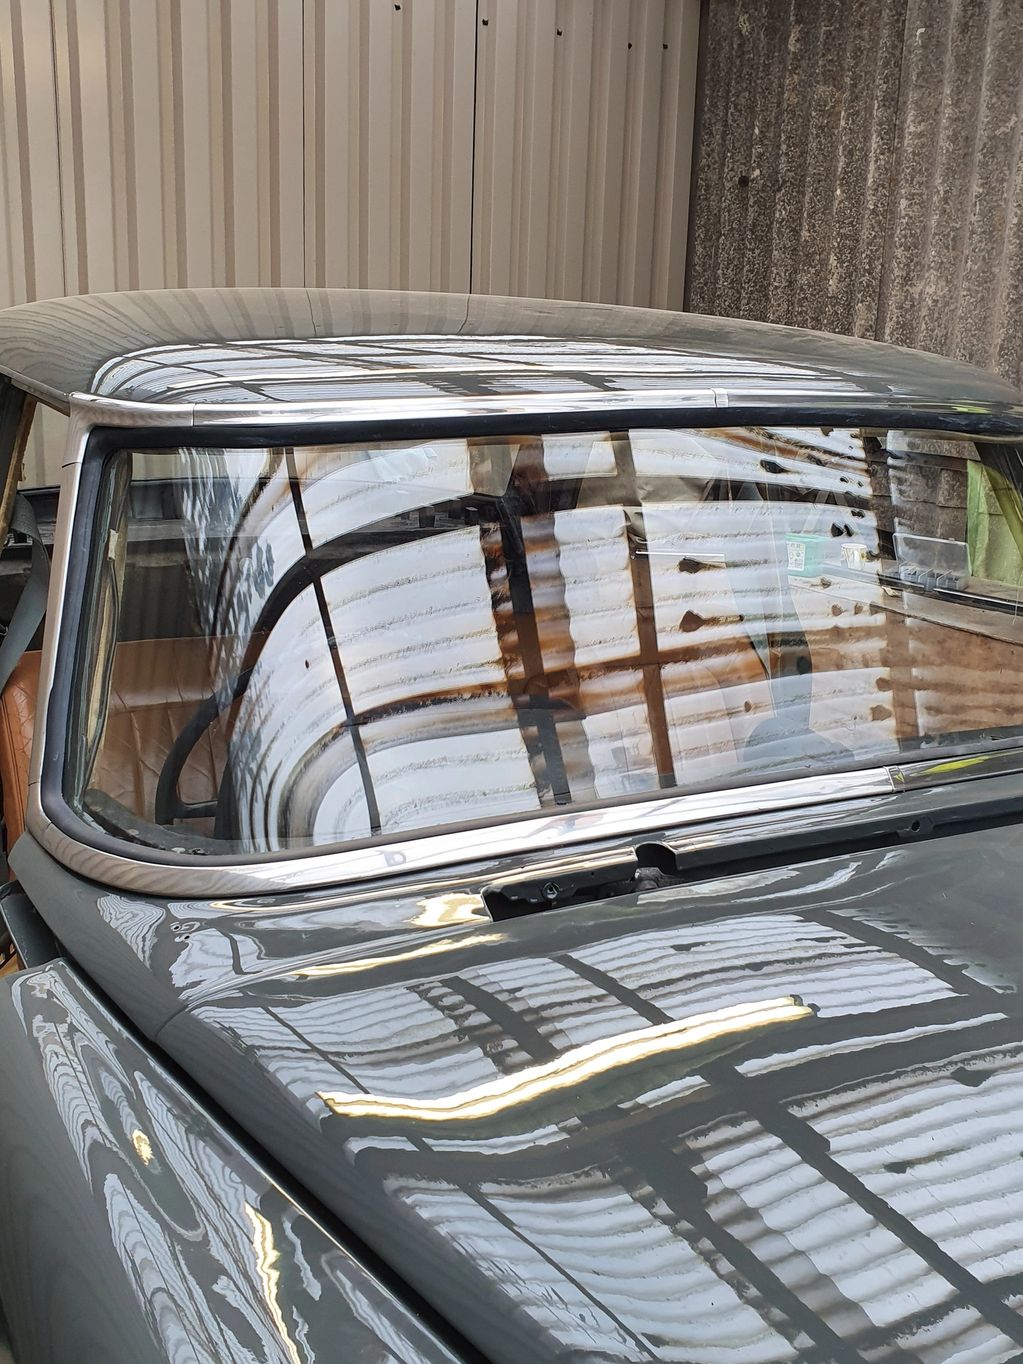 A lovely rover p5 windscreen and rear screen recently done in Faversham  